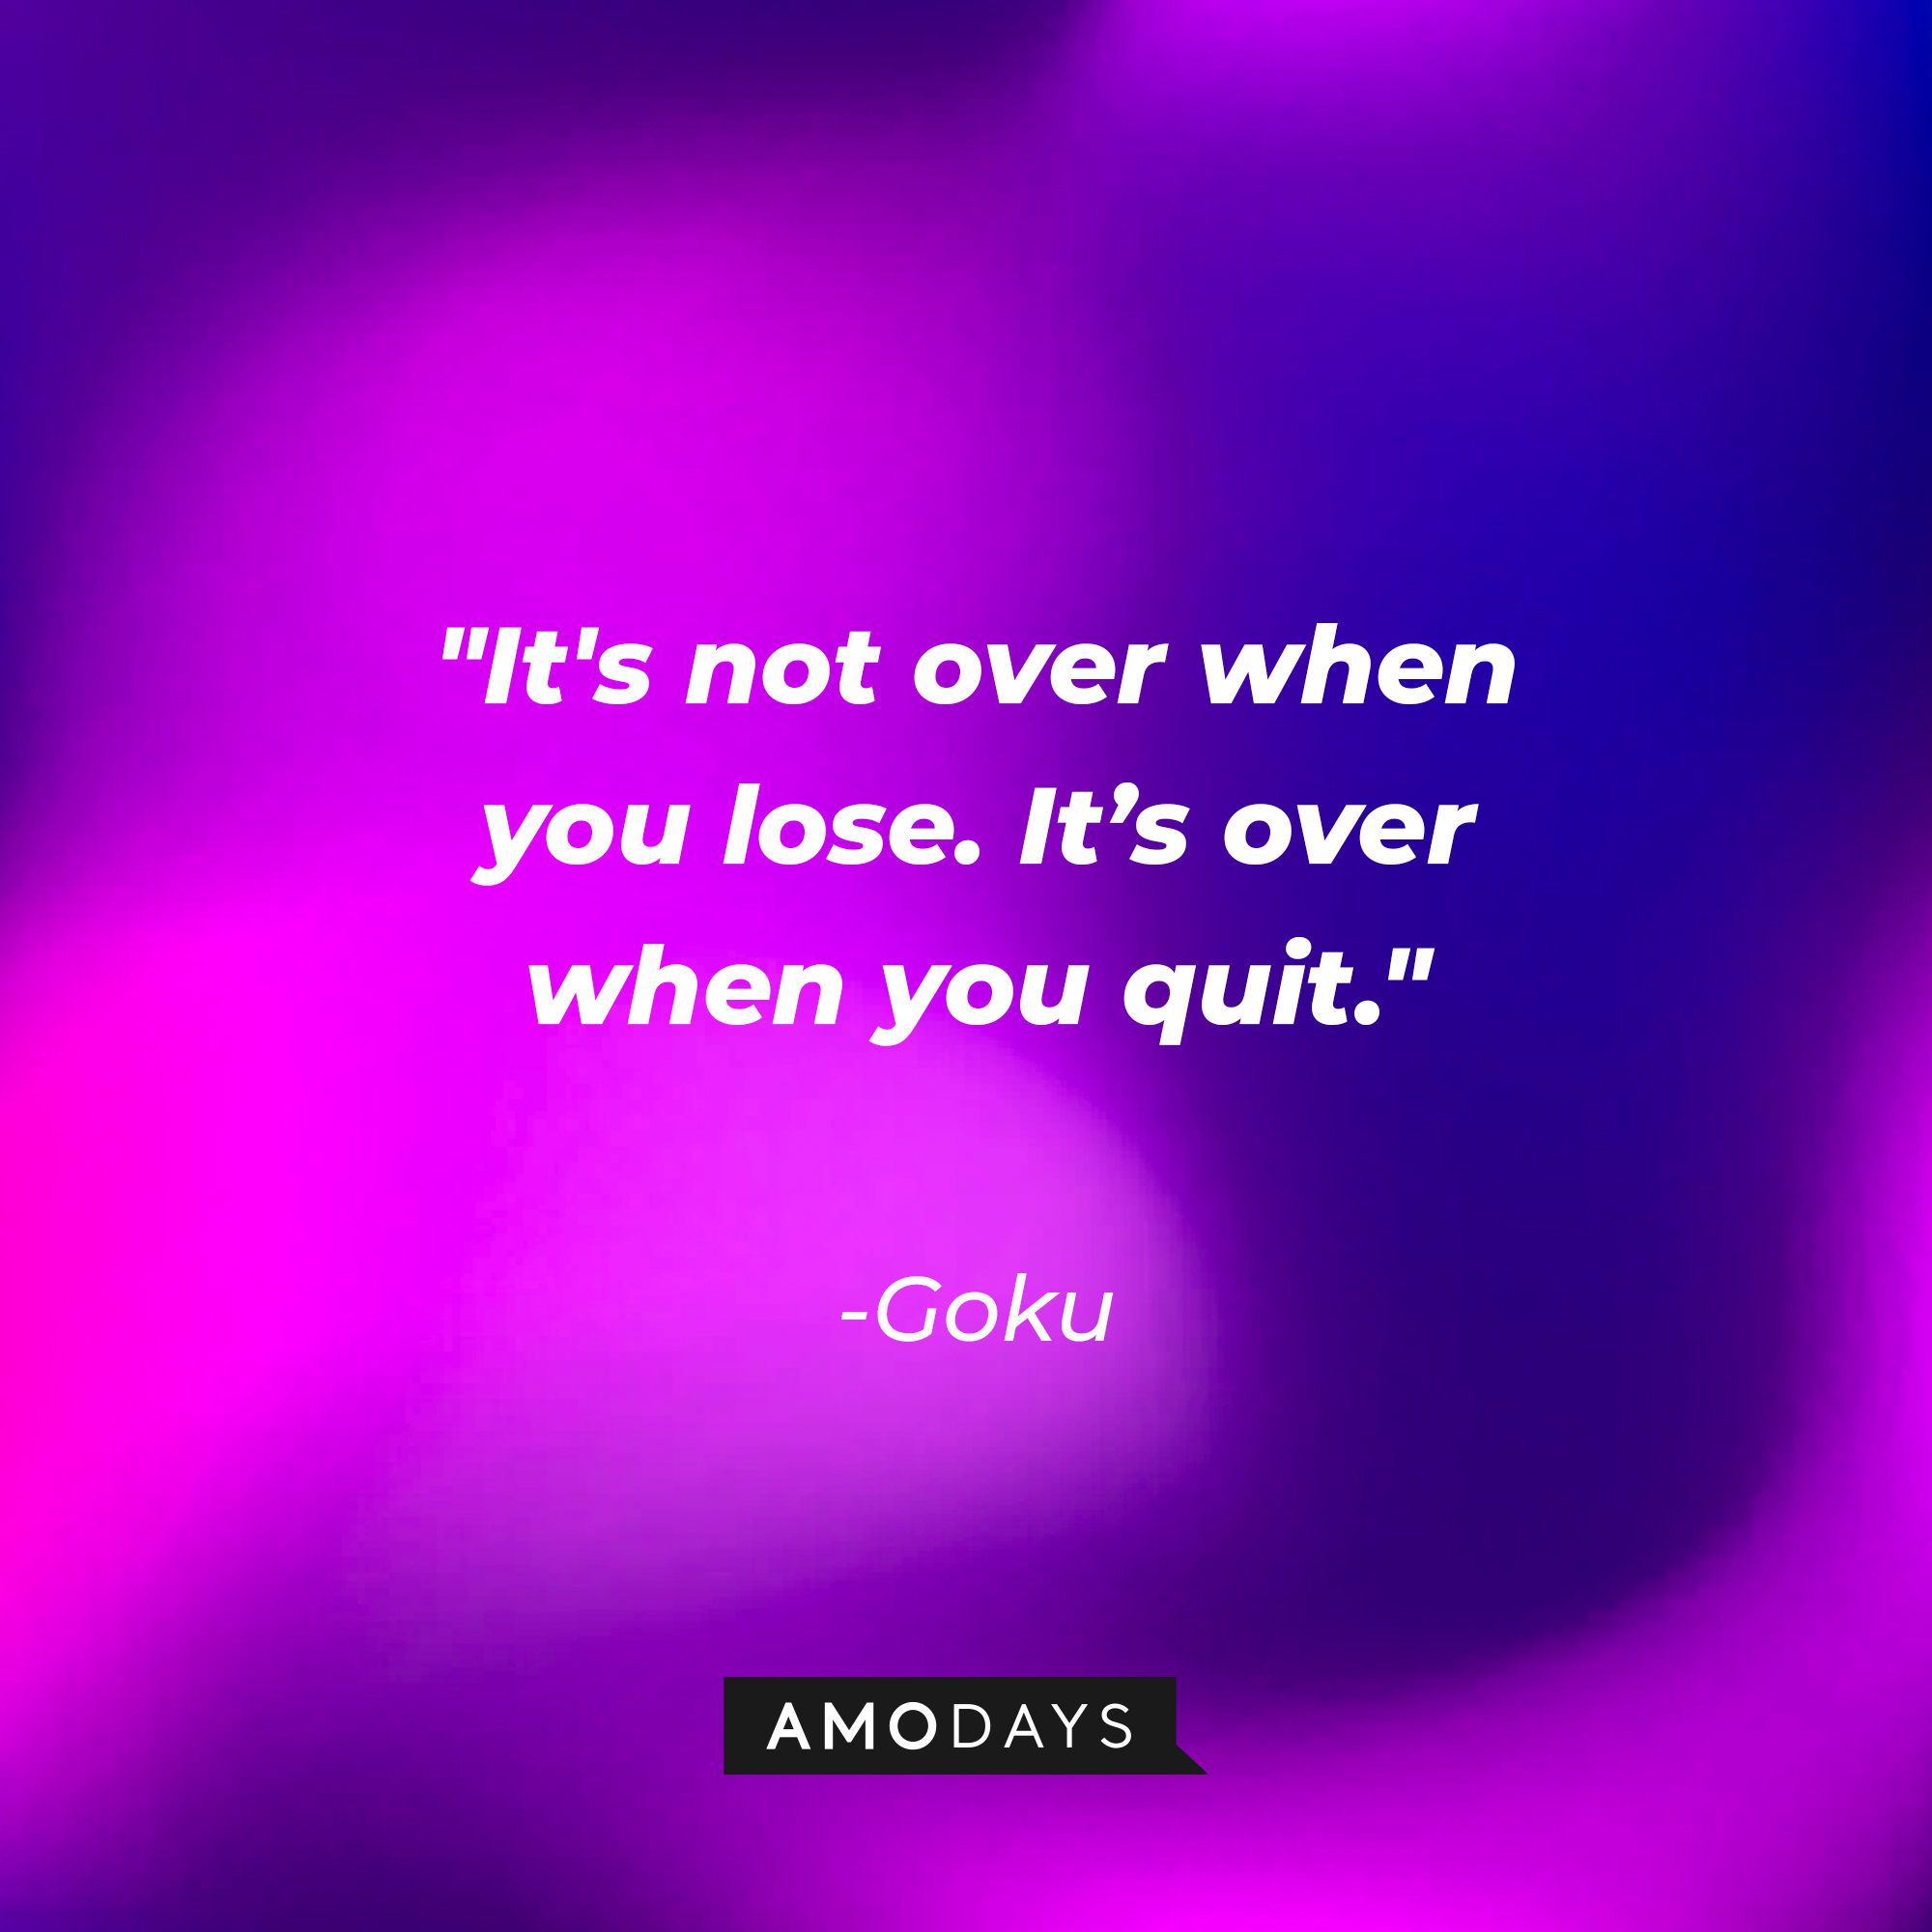 Goku's quote: "It's not over when you lose. It's over when you quit." | Source: youtube.com/DragonballBlack